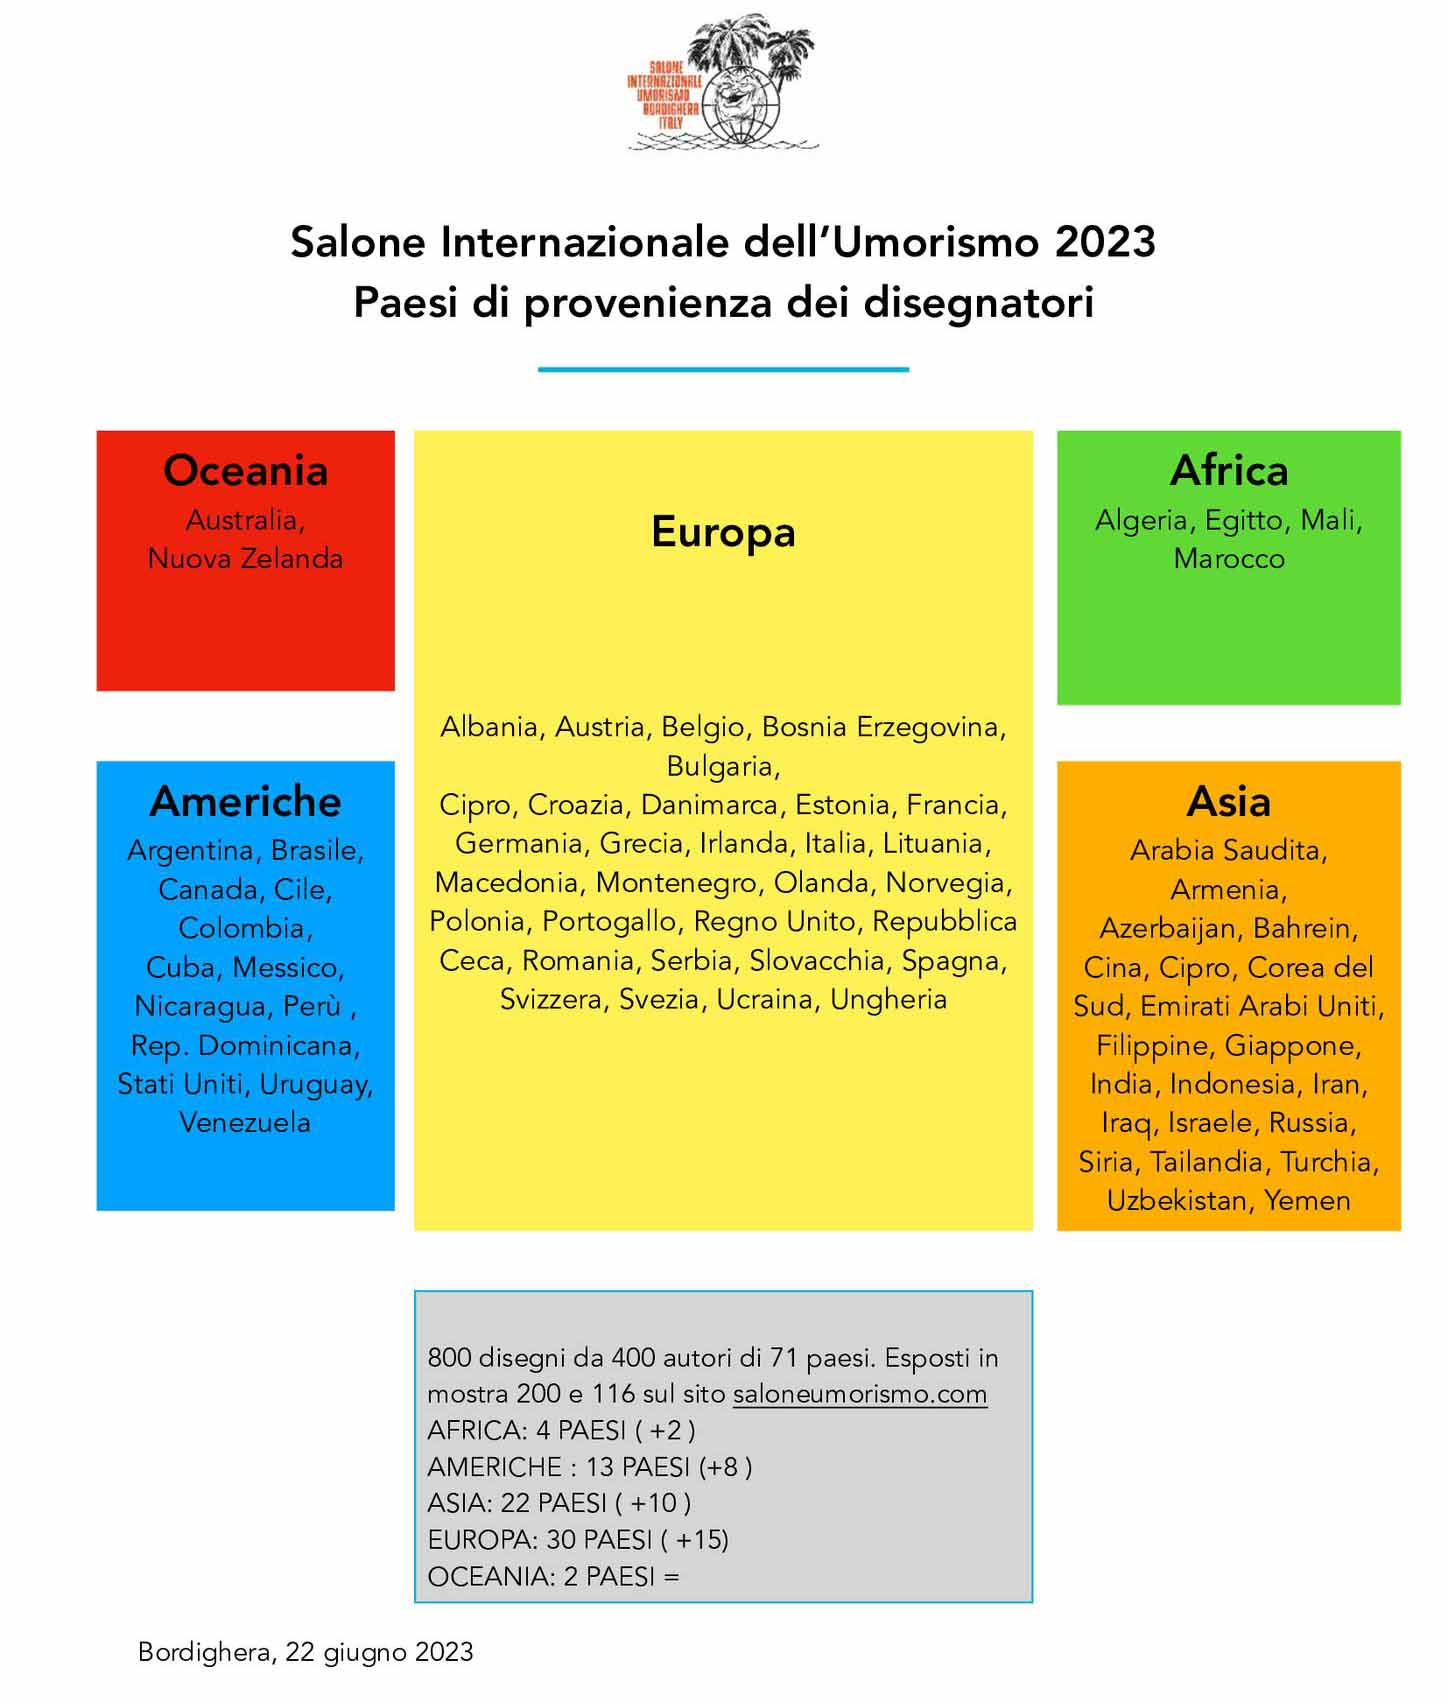 List of Participating Countries in International Exhibition of Humor 2023, Italy